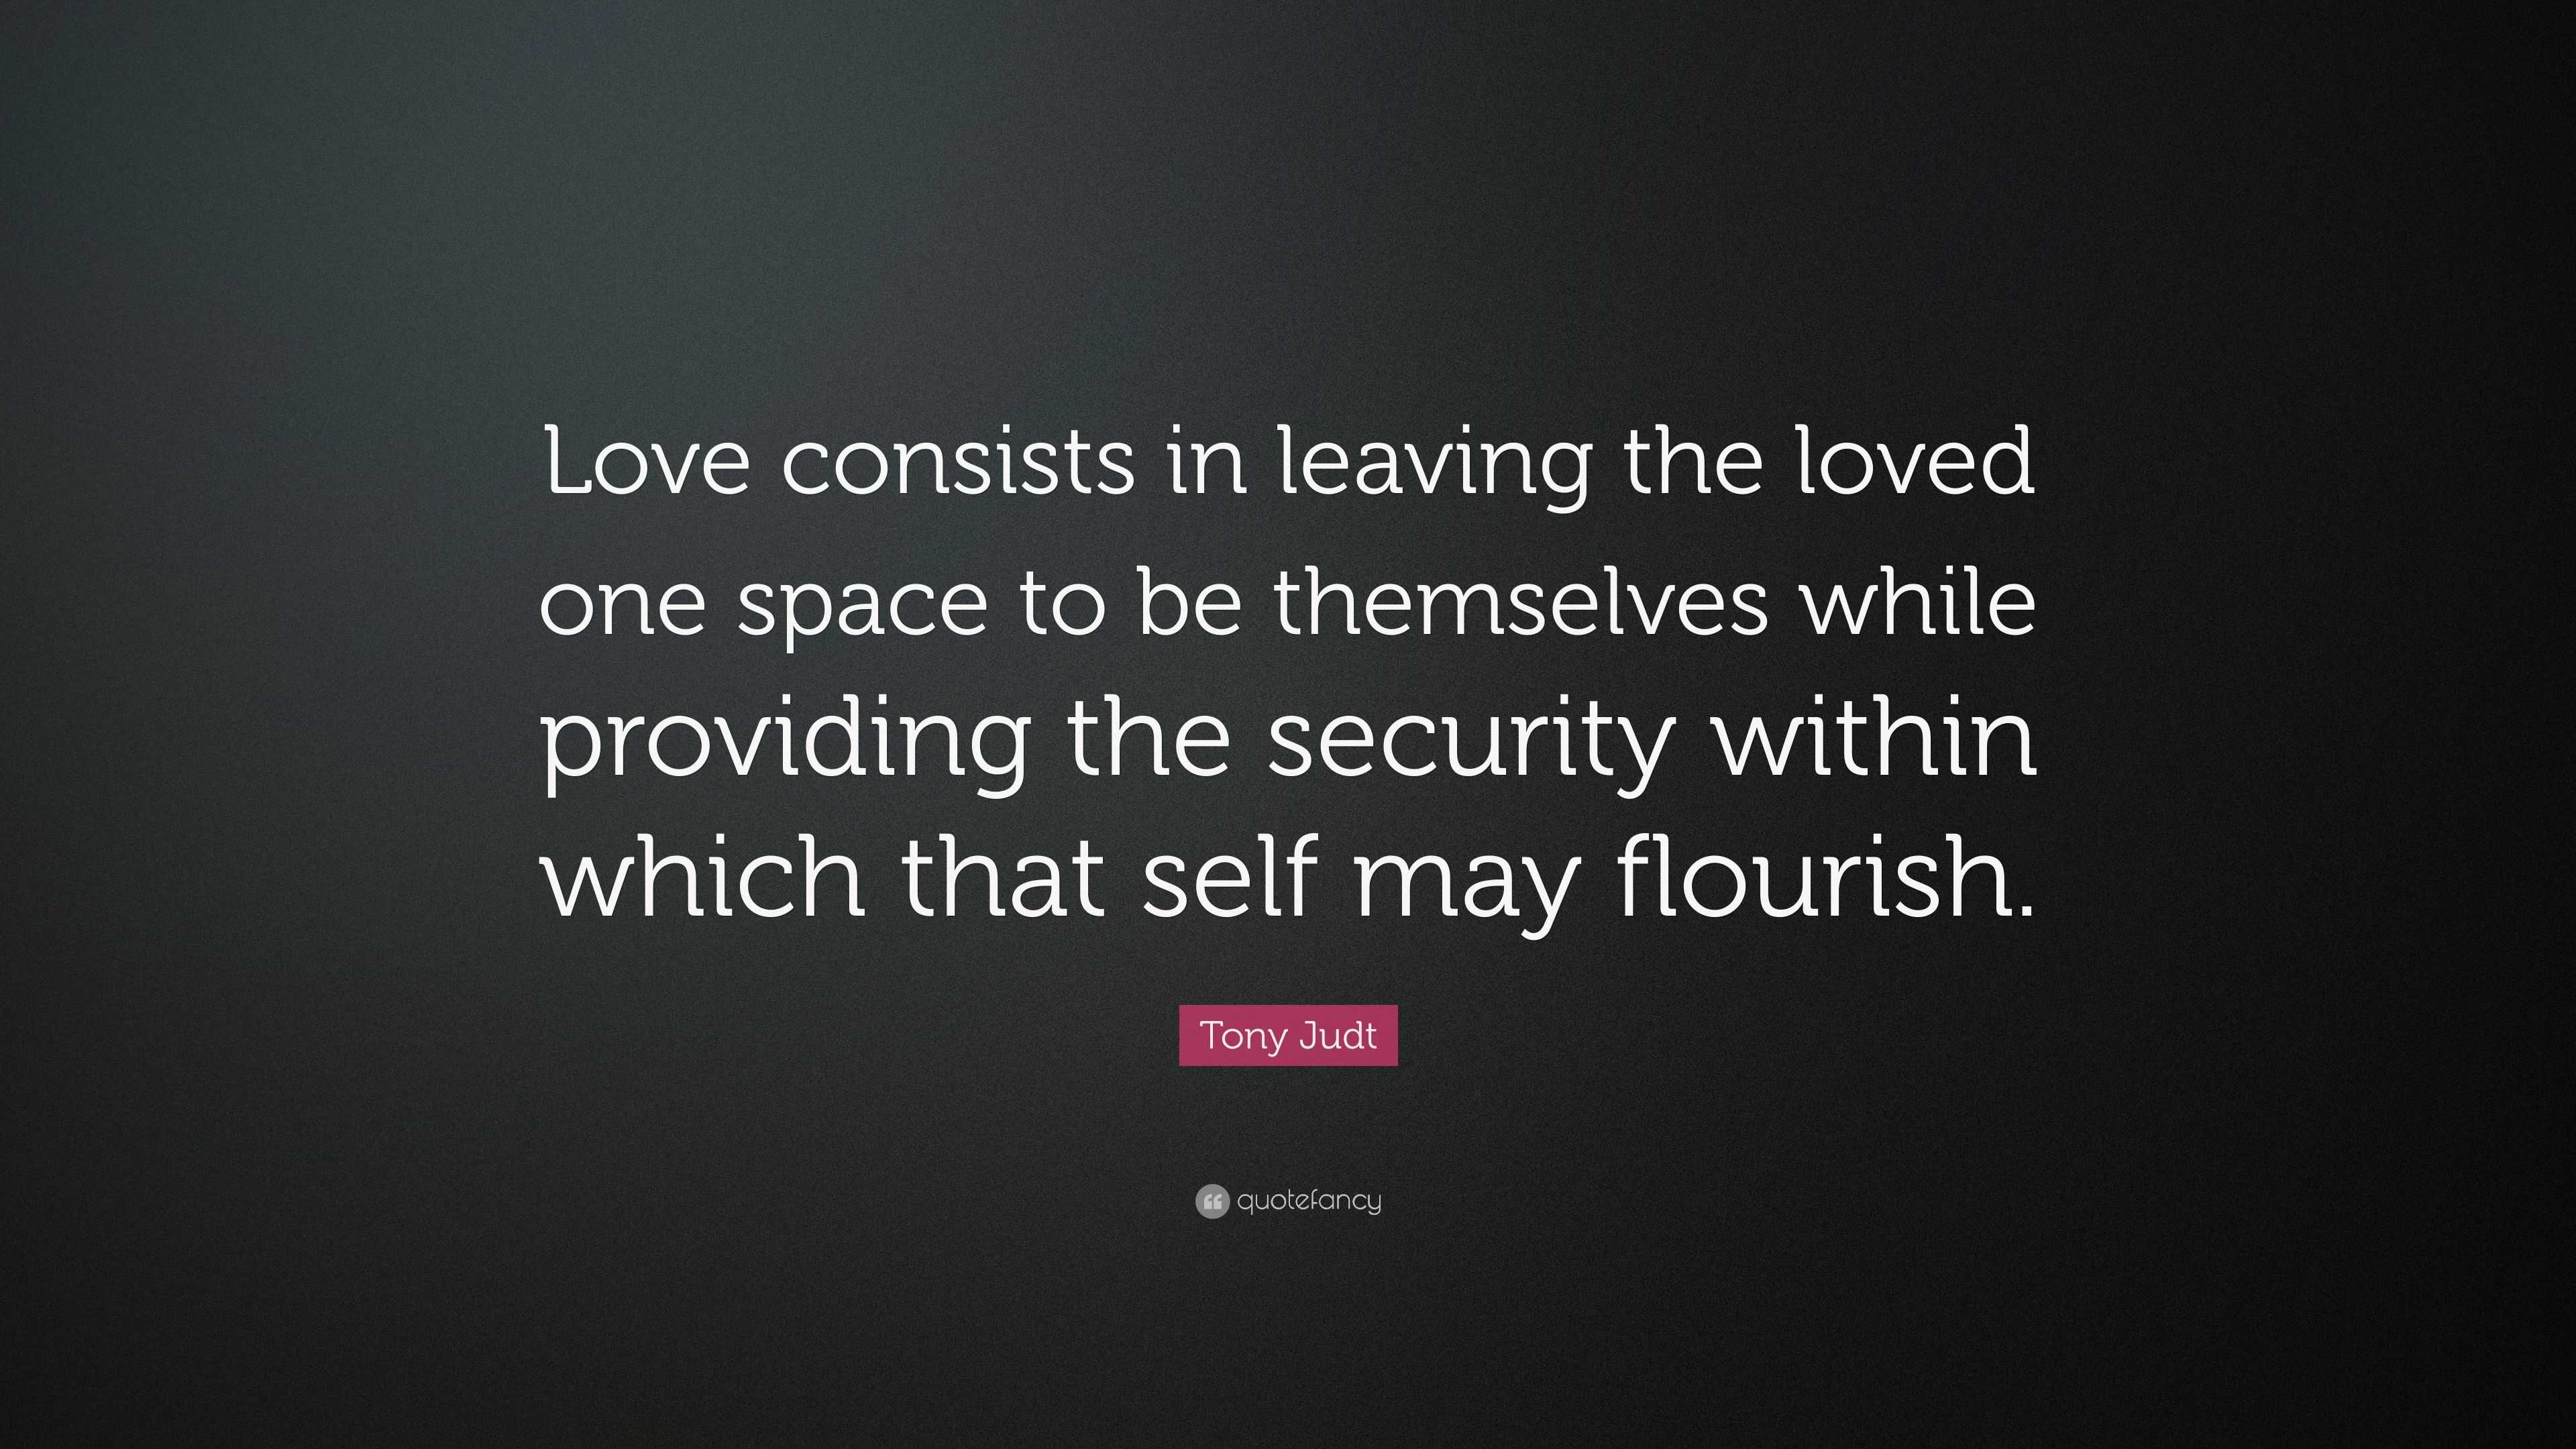 Tony Judt Quote “Love consists in leaving the loved one space to be themselves